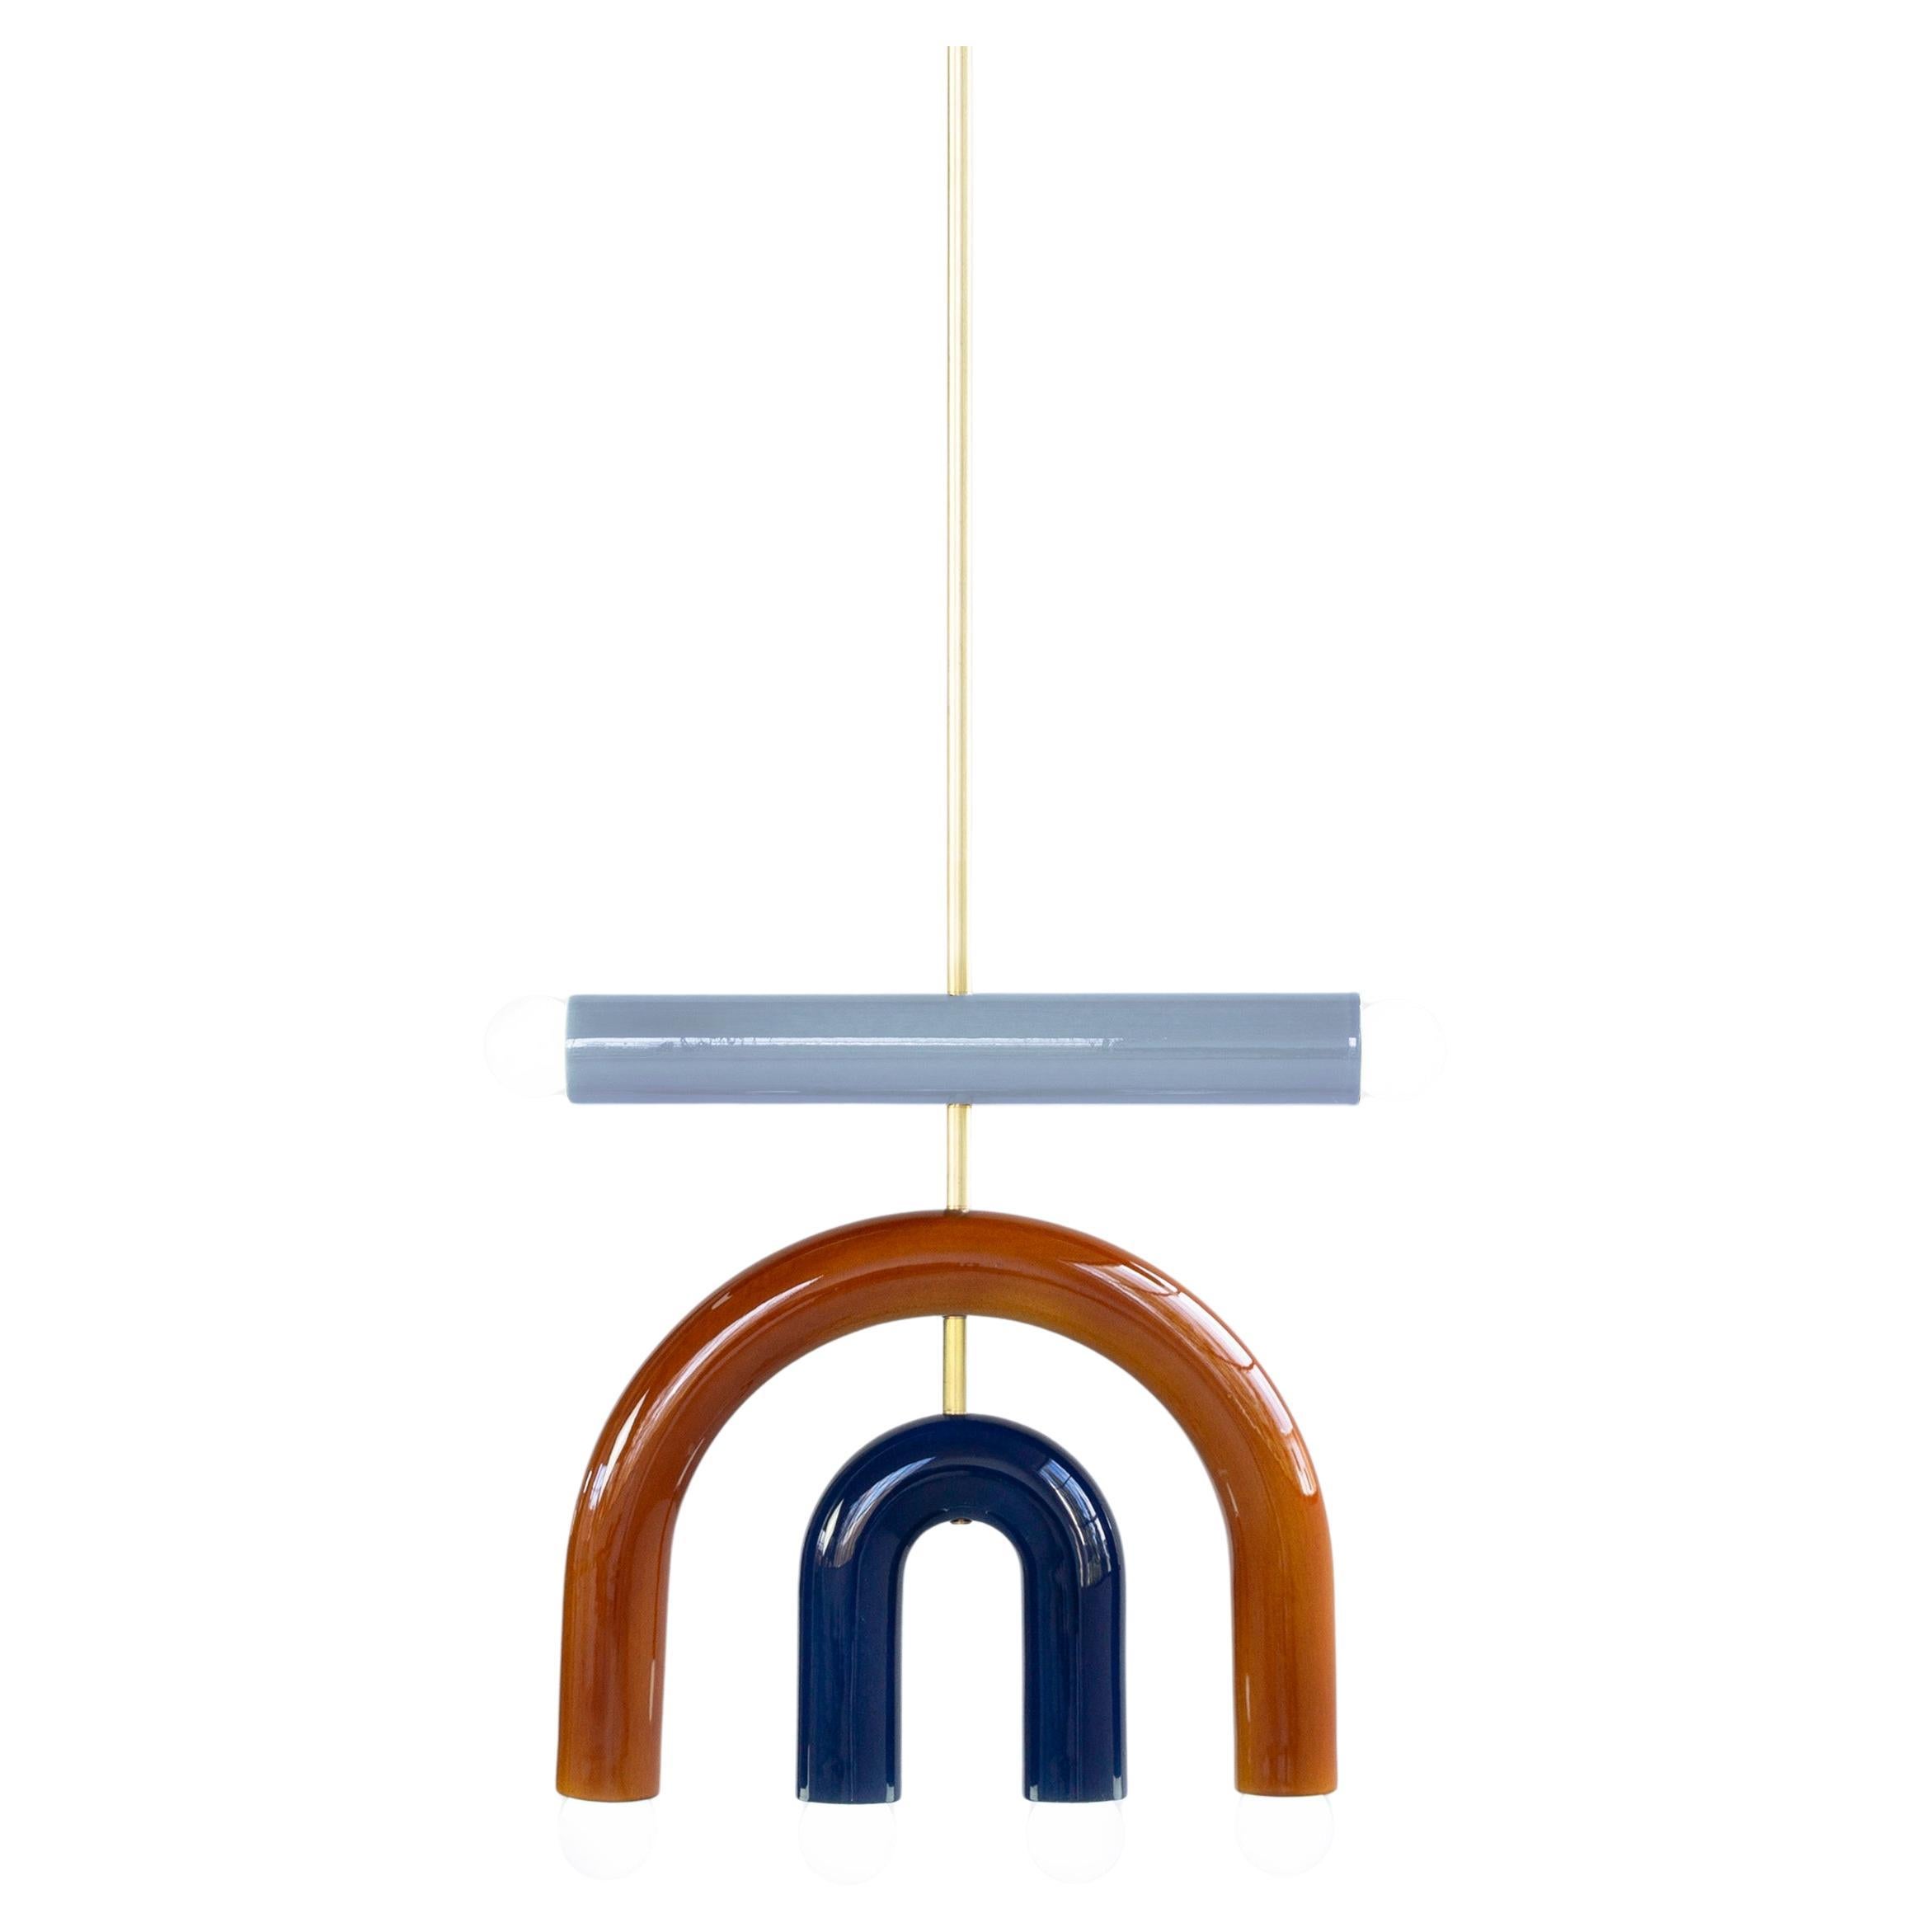 TRN D1 Pendant lamp / ceiling lamp / chandelier 
Designer: Pani Jurek

Model shown: TRN D1, Brown, Mellow yellow, Lilac, Brass rod
Dimensions: H37.5 x 35 x 5 cm

Bulb (not included): E27/E26, compatible with US electric system

Materials: Hand